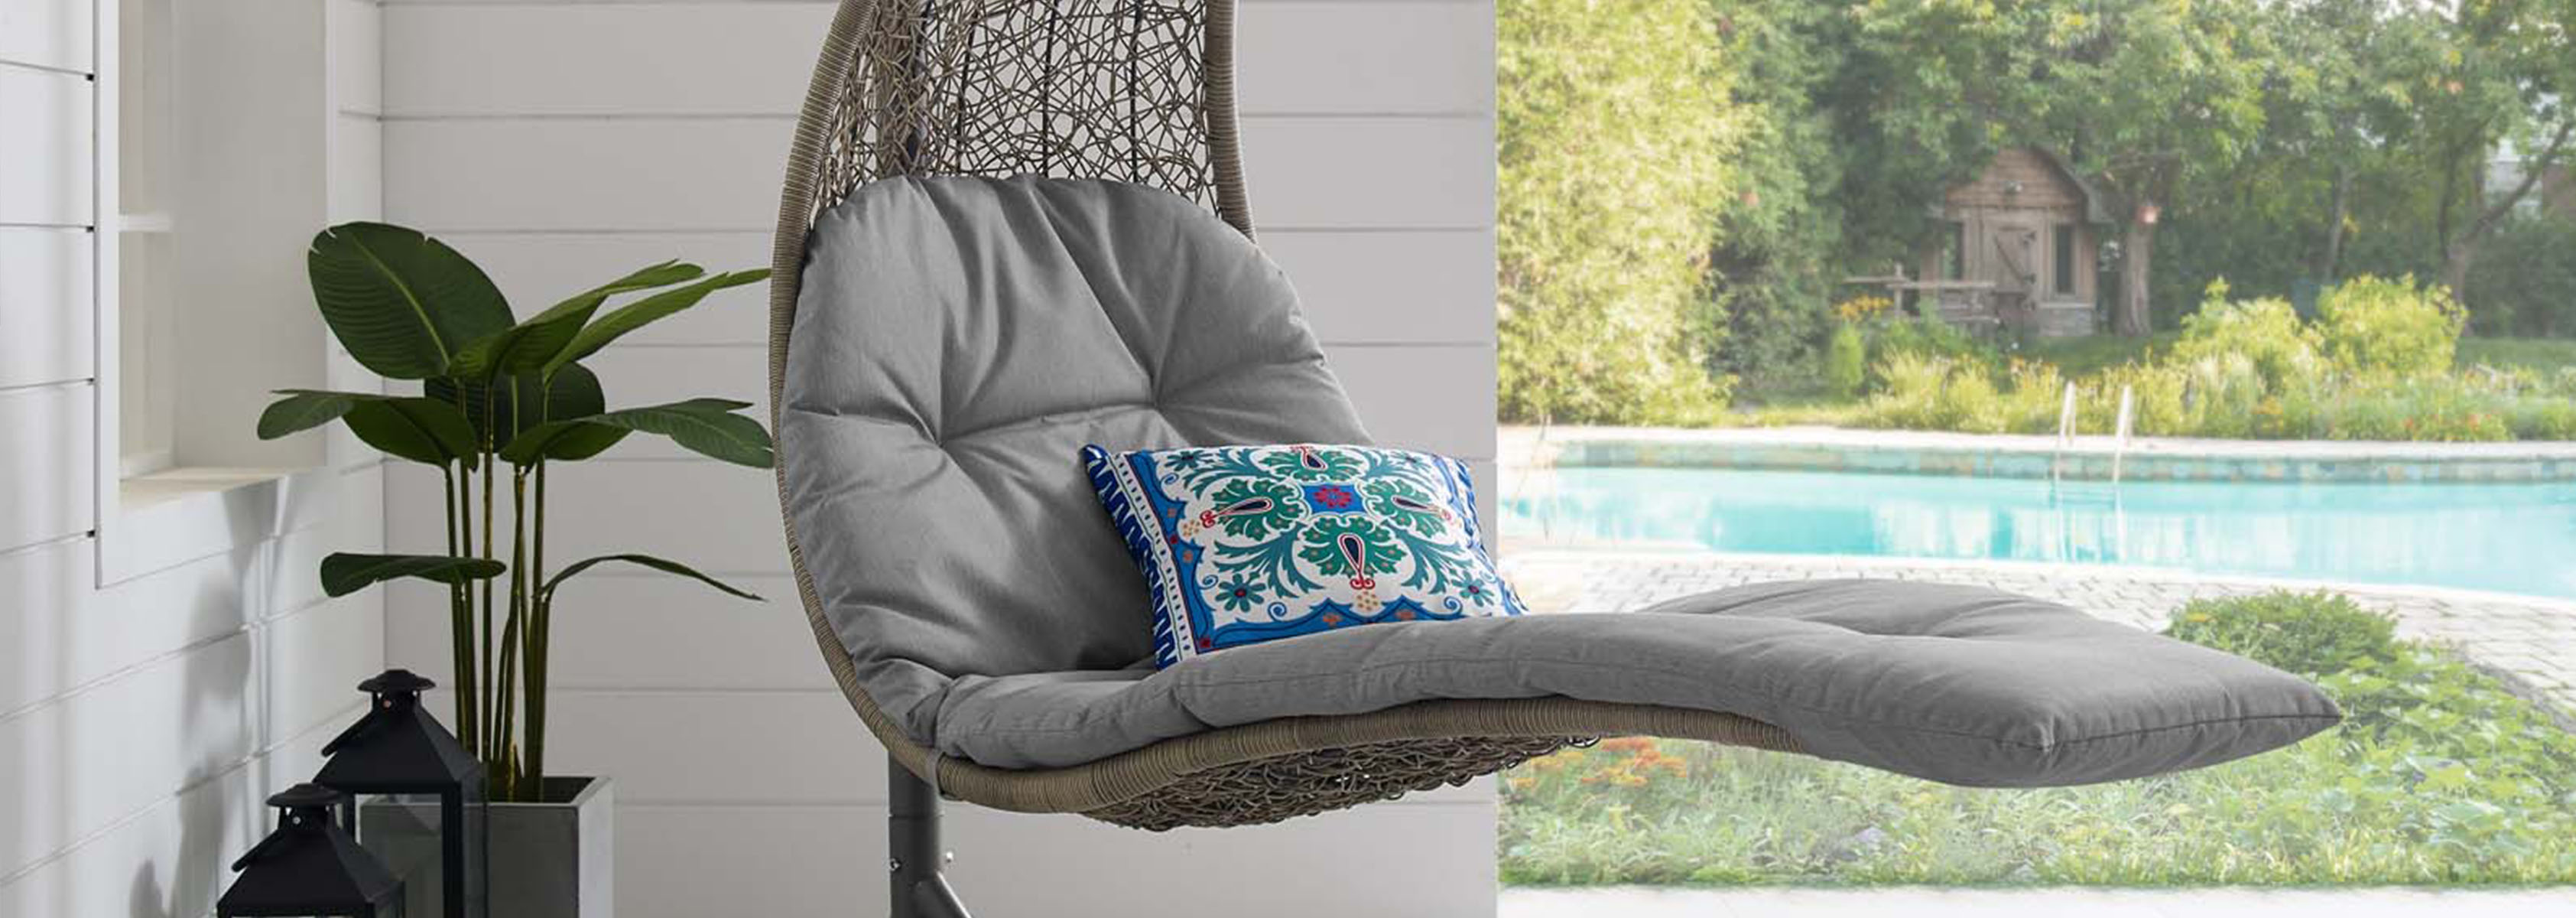 Outdoor pillows with classic designs add comfort and style.